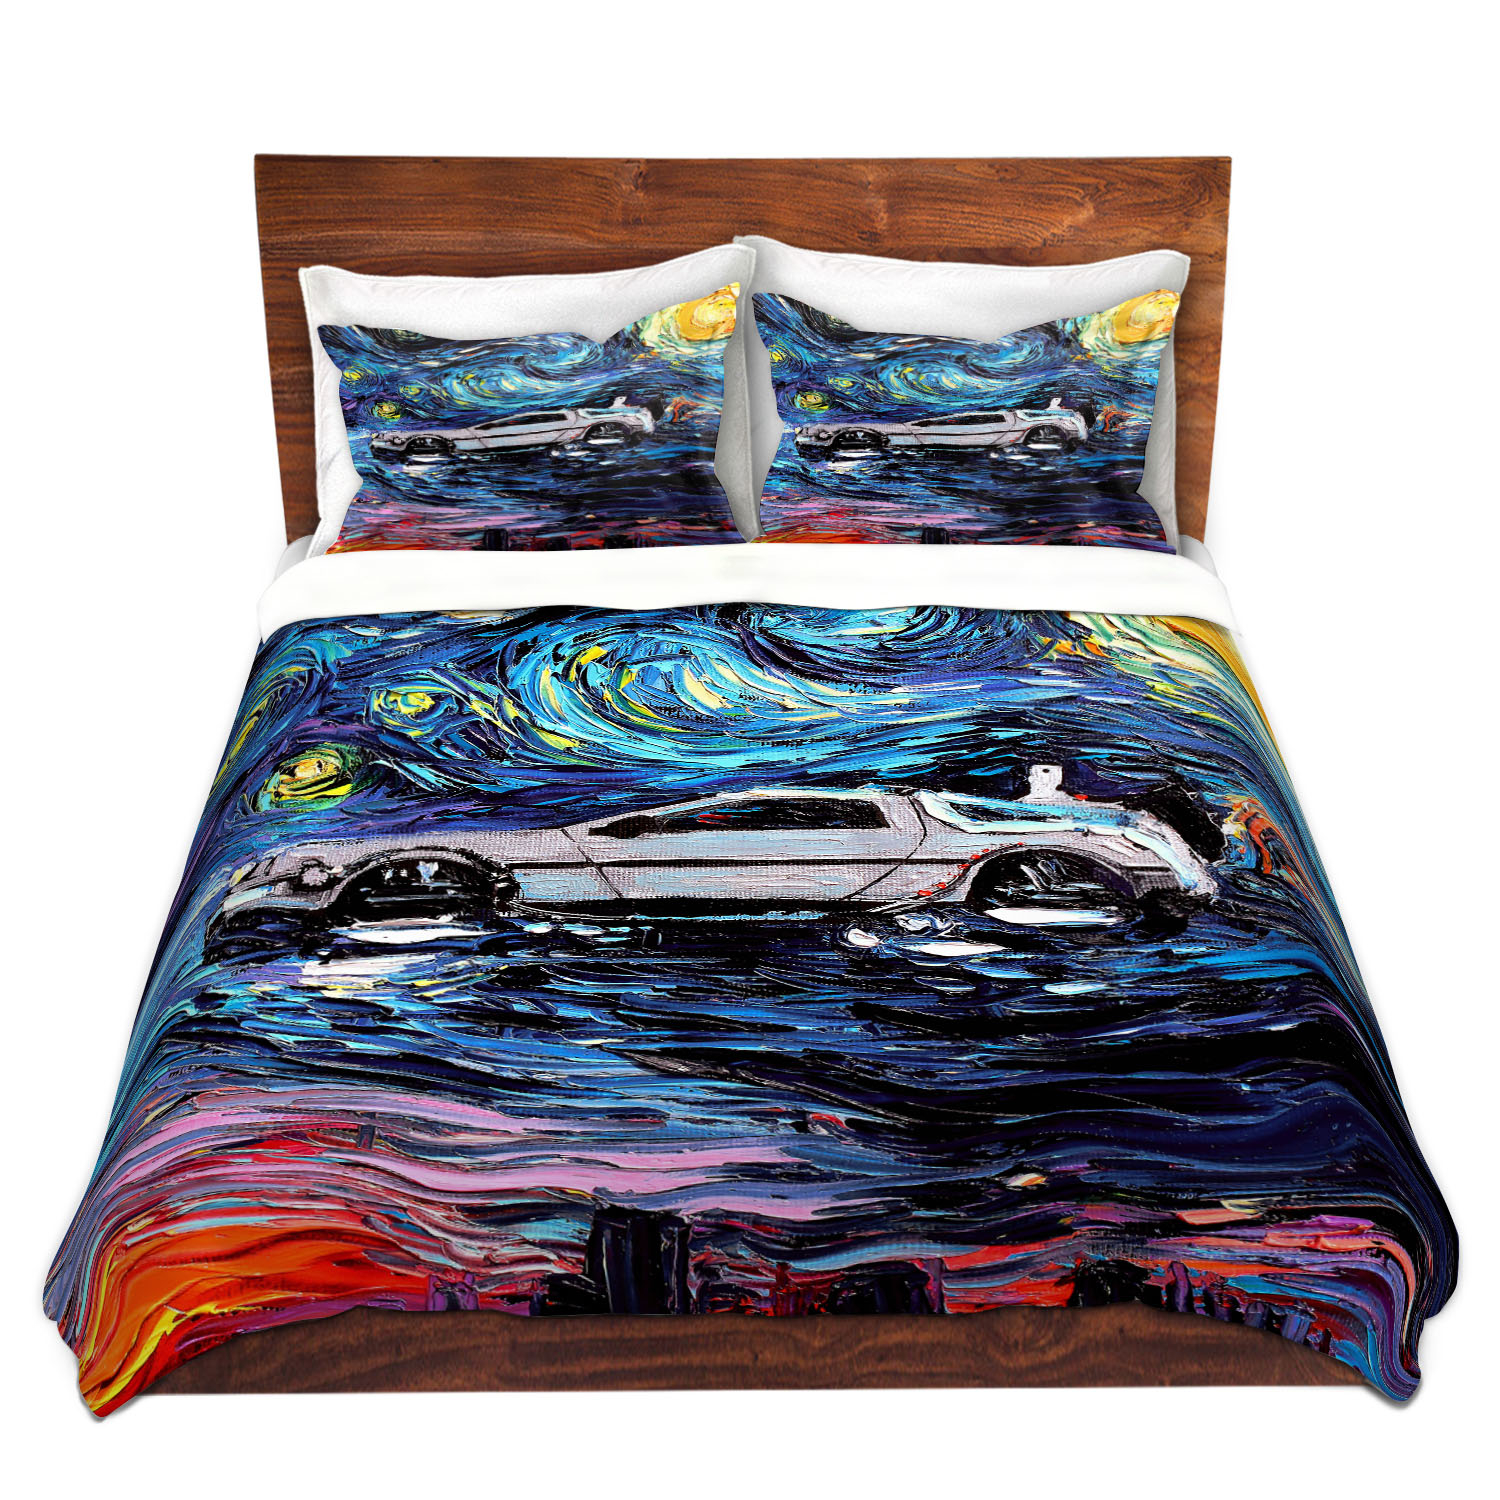 Dianoche Microfiber Duvet Covers By Aja Ann - Van Gogh Back To The Future